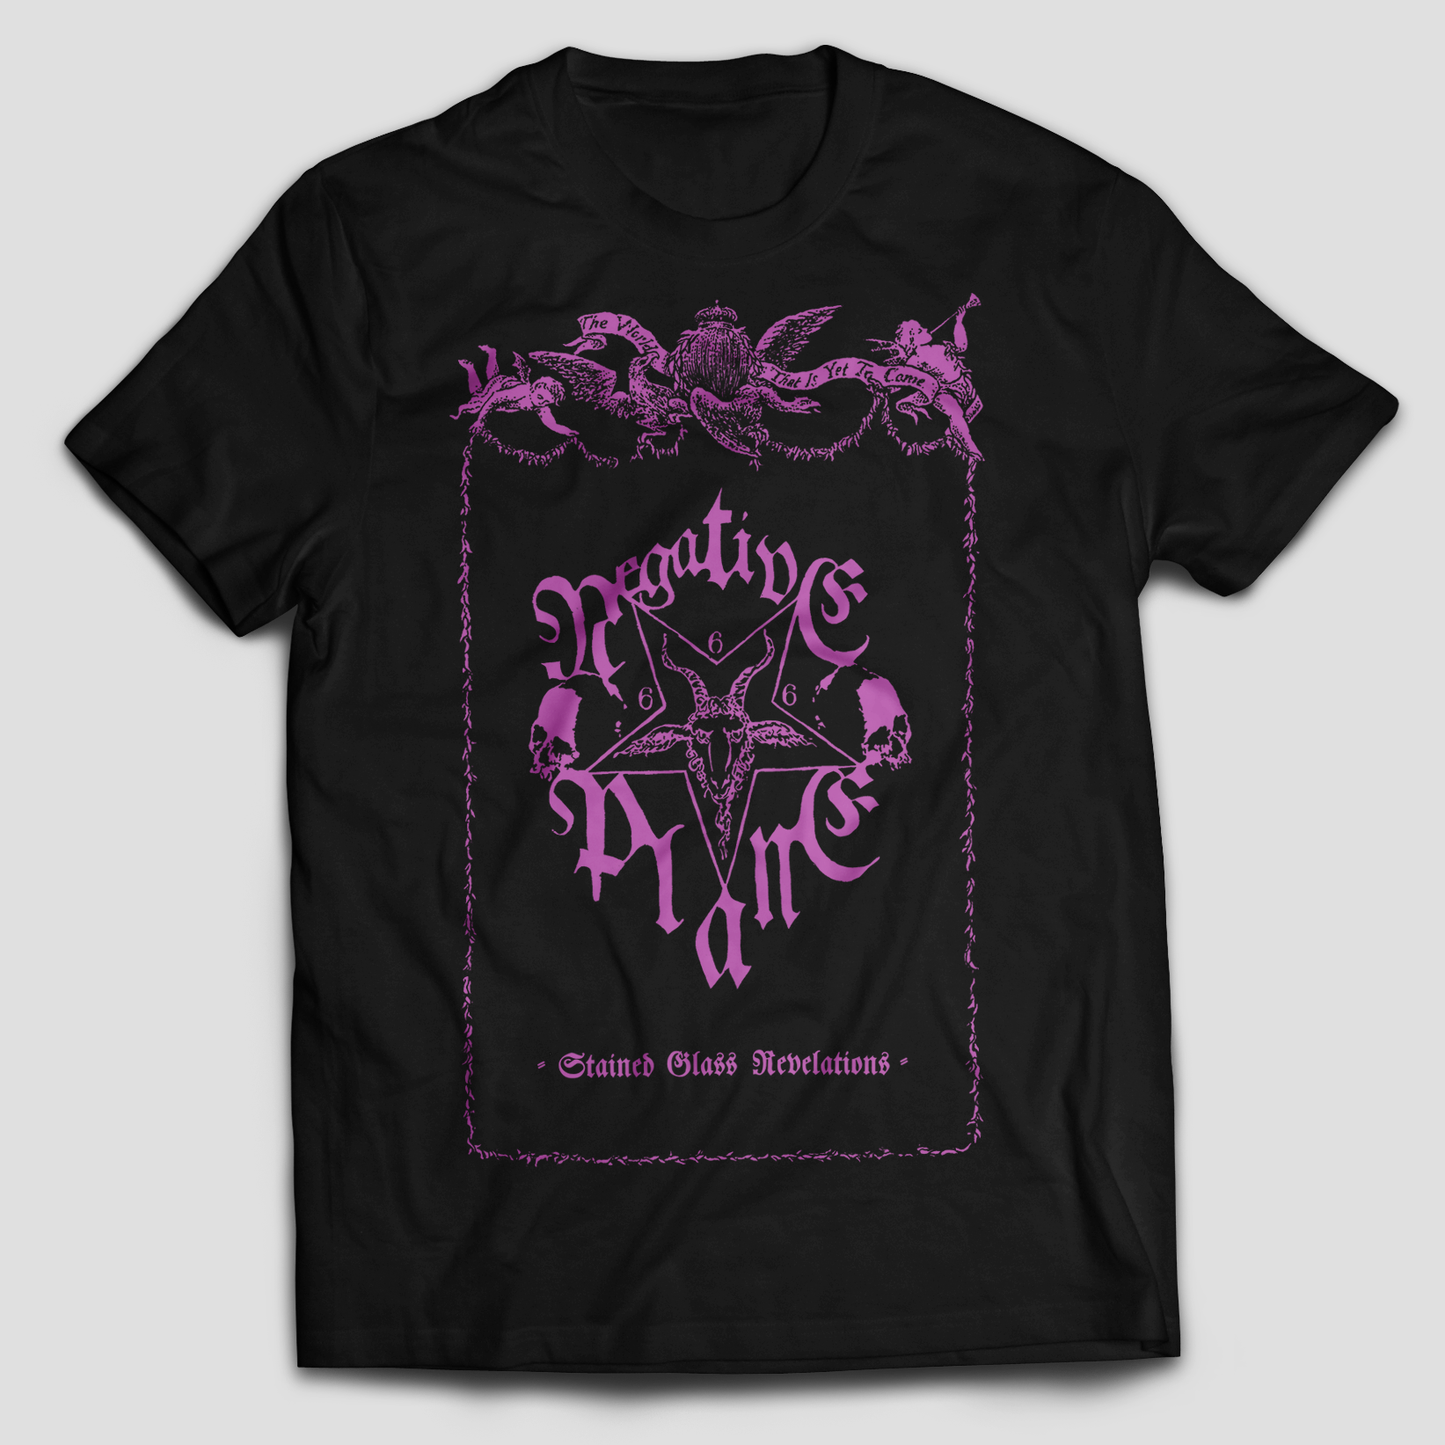 Negative Plane - Stained Glass Revelations T Shirt